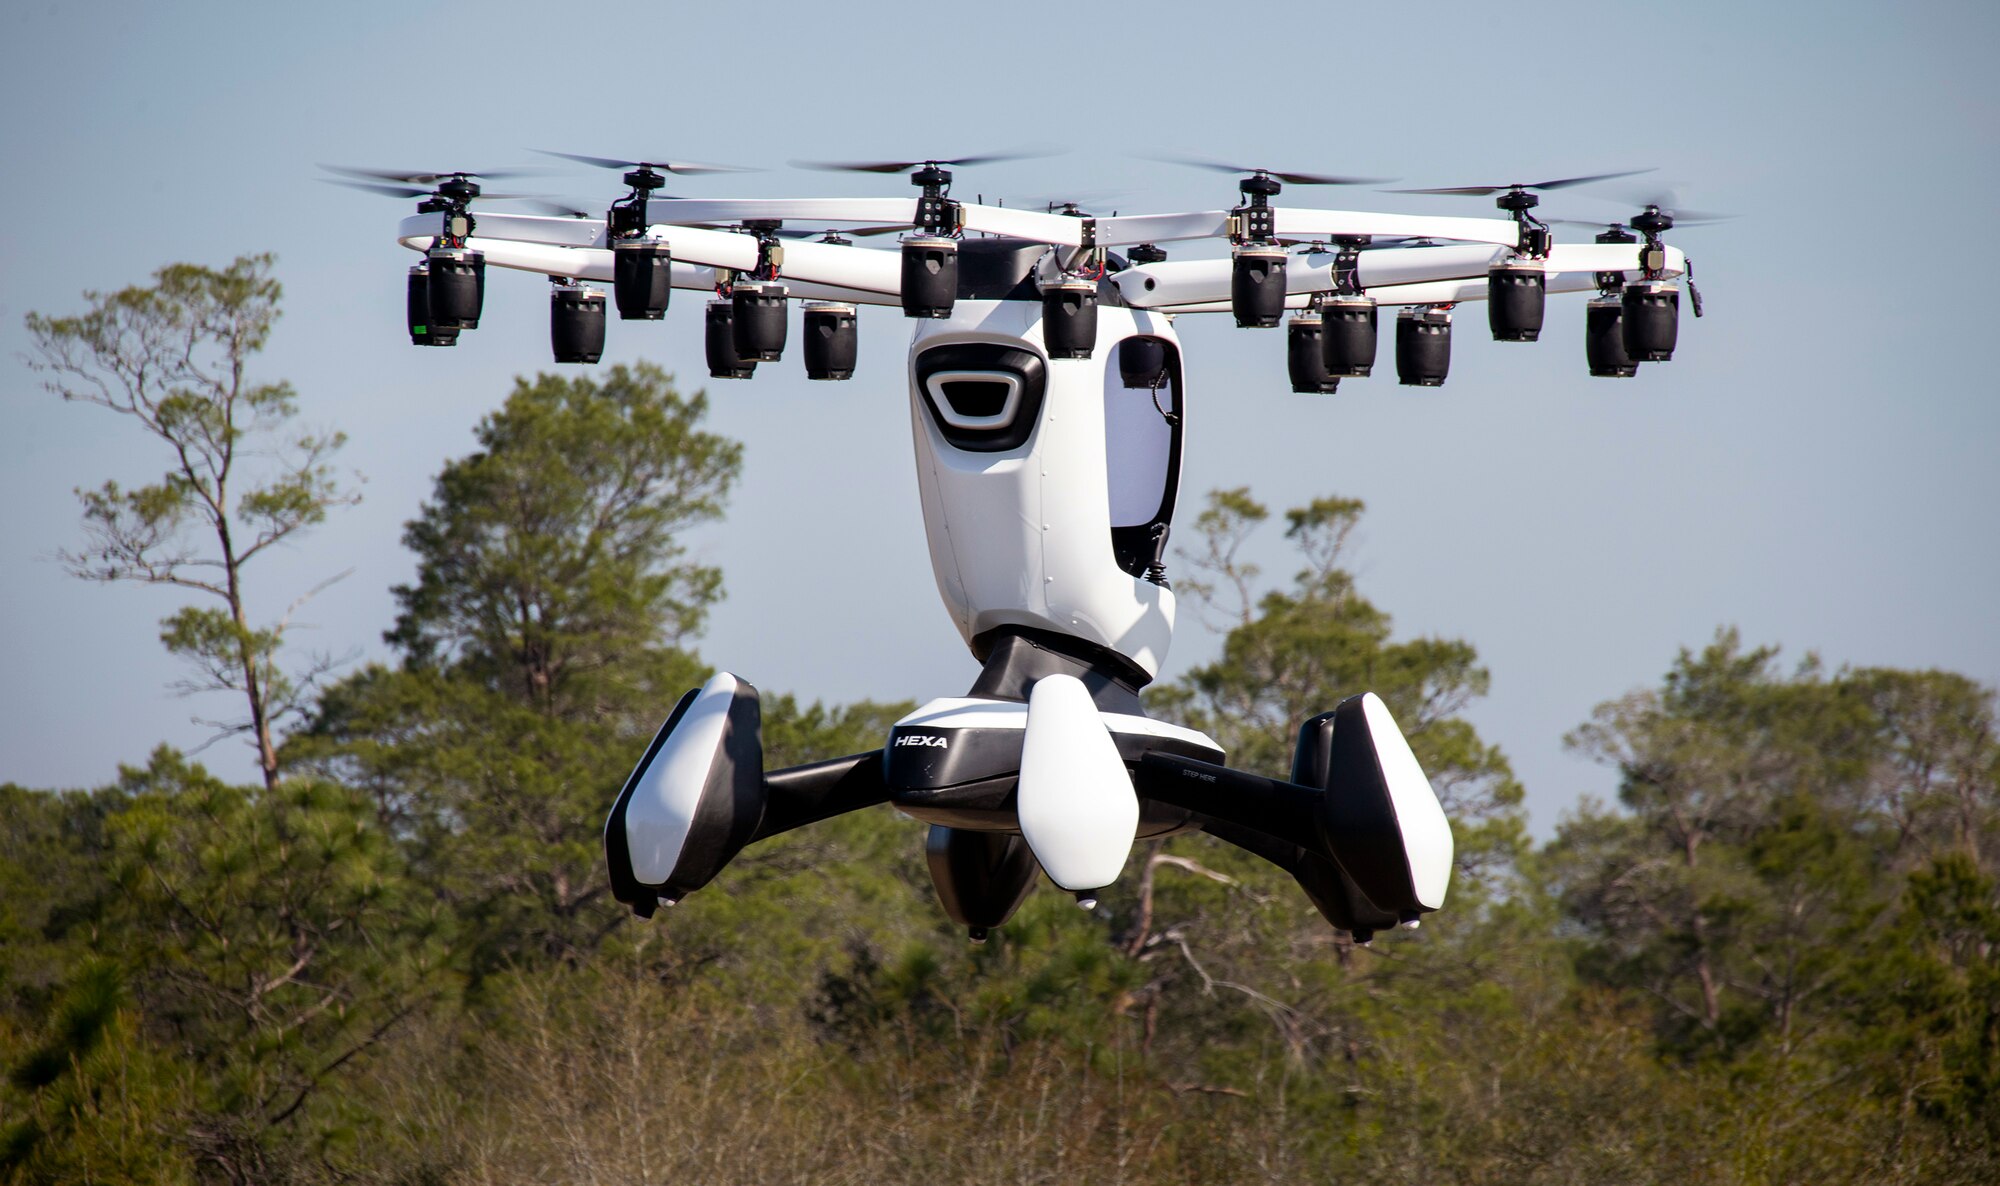 The Hexa, an electric, vertical takeoff and landing aircraft, hovers in the air